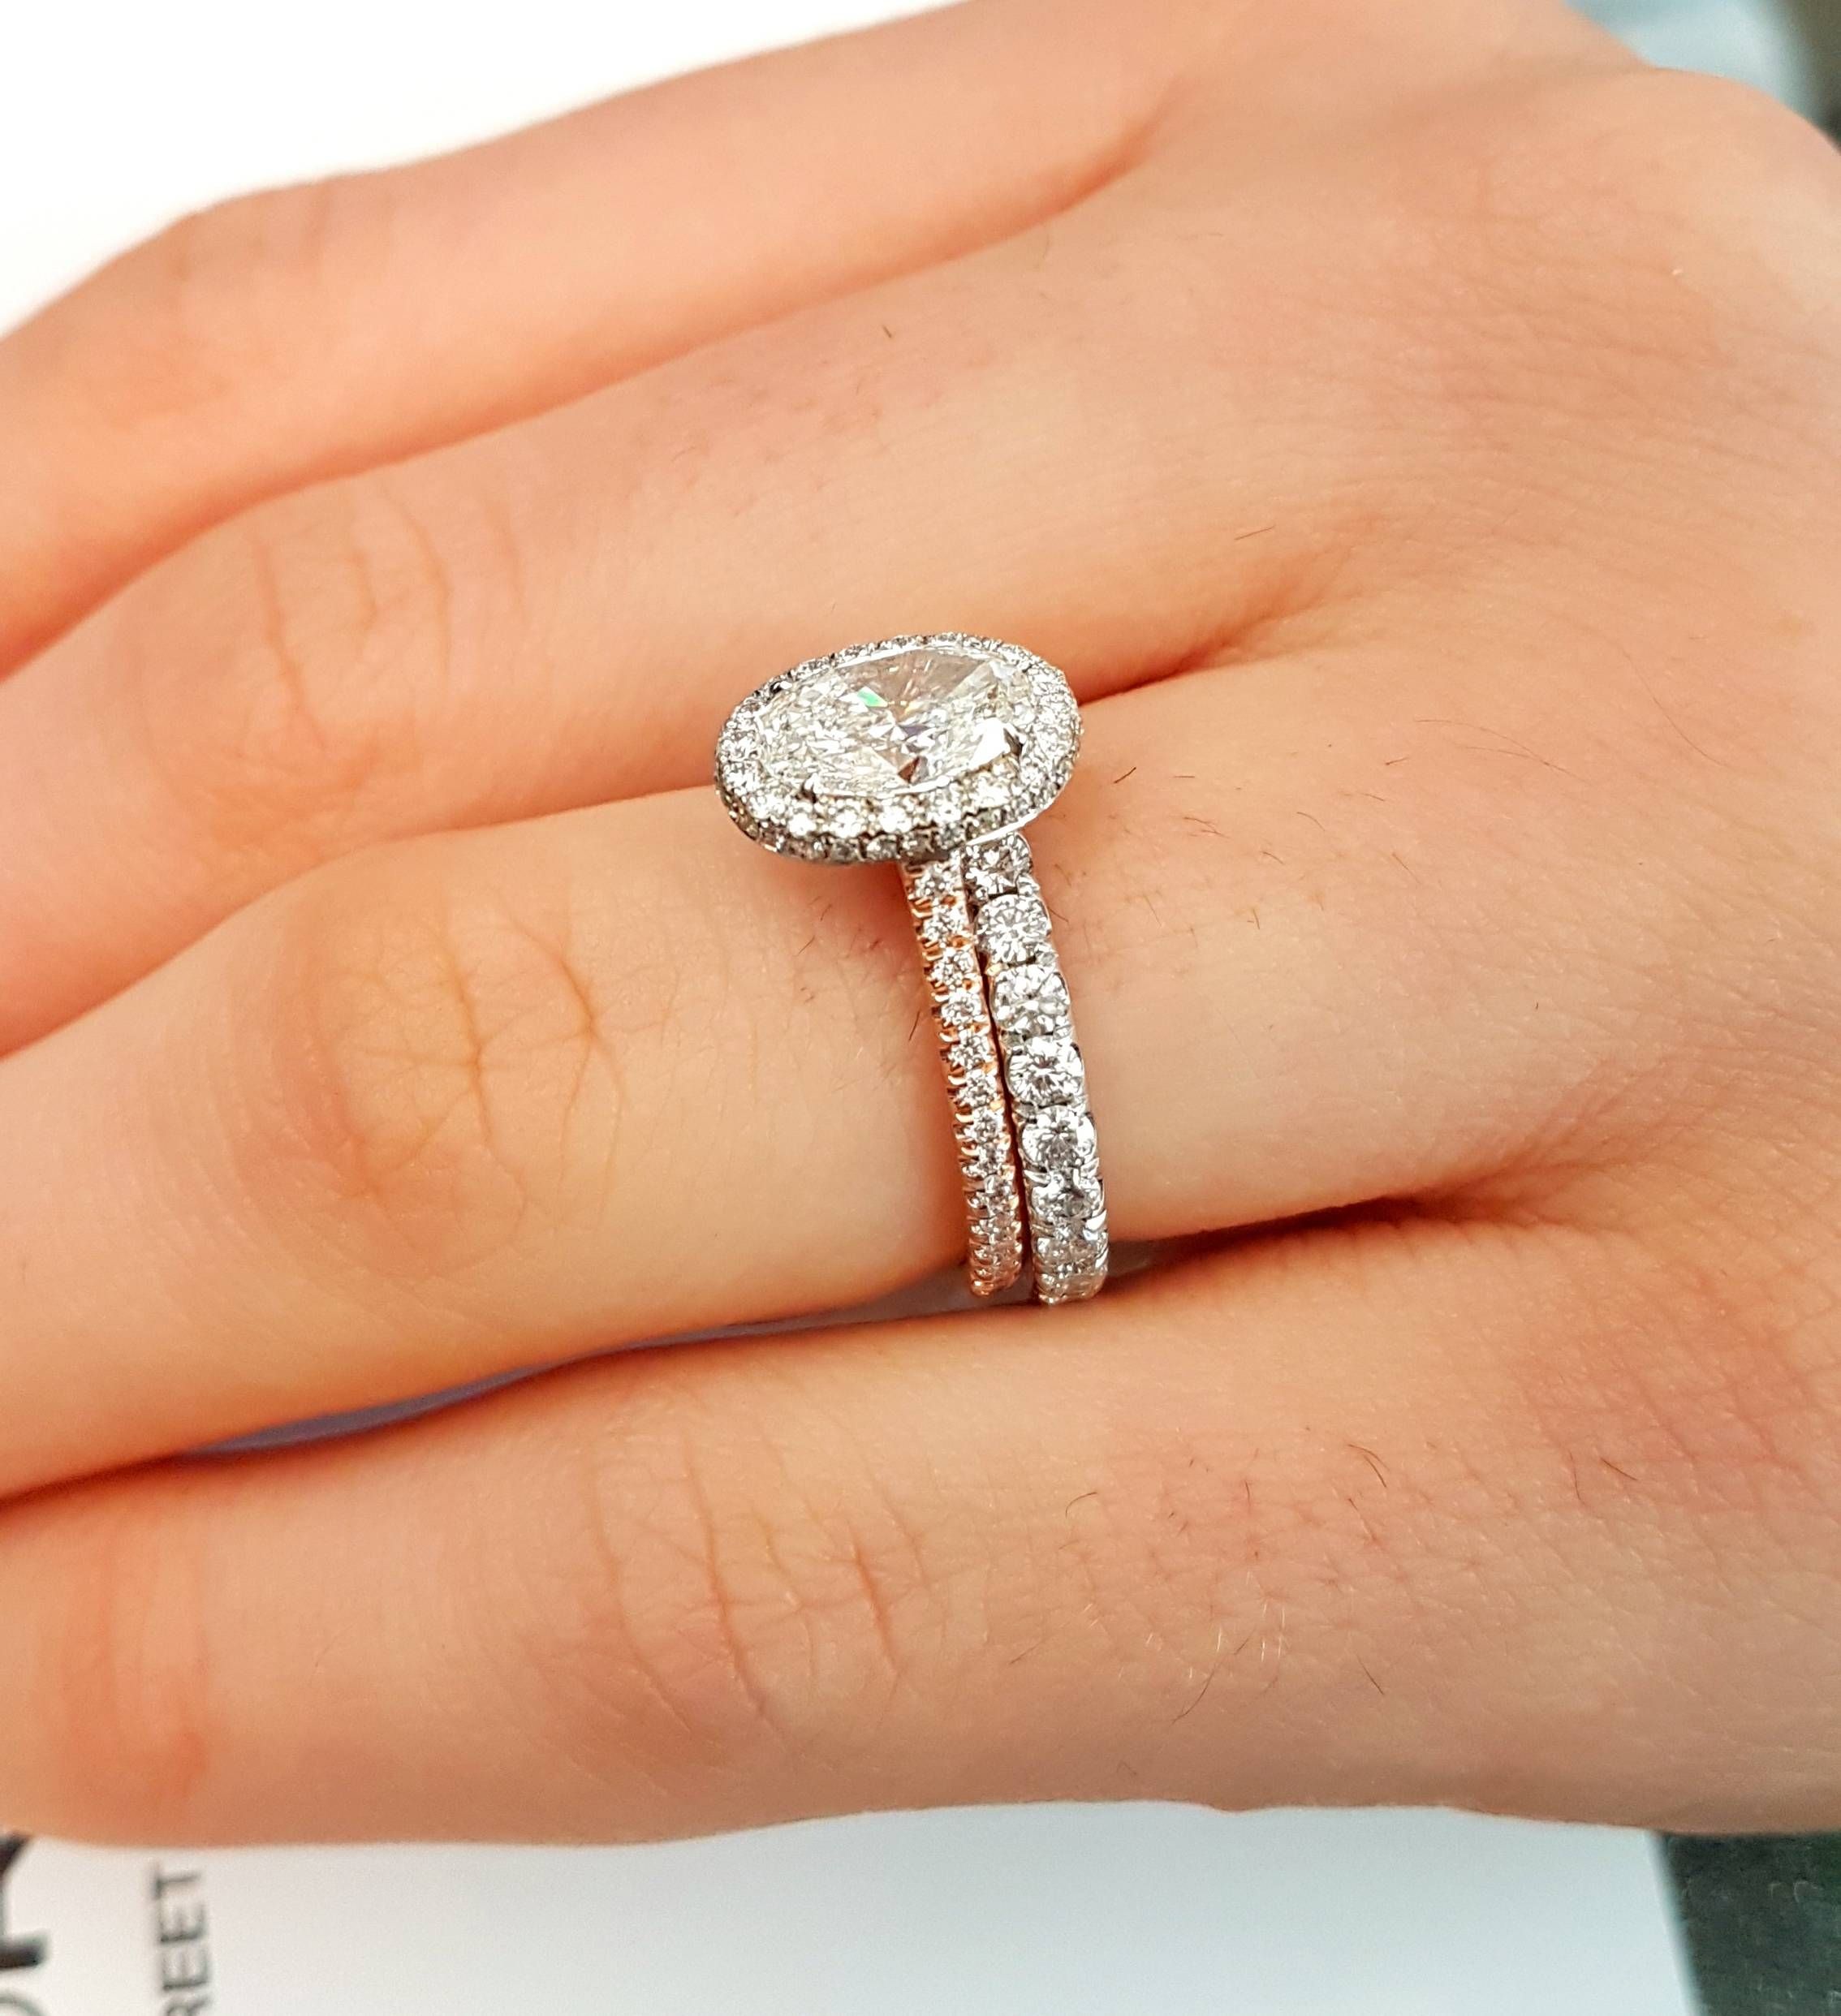 Mixing And Matching Wedding Bands / Blog Regarding Engagement Rings With Wedding Bands (View 14 of 15)